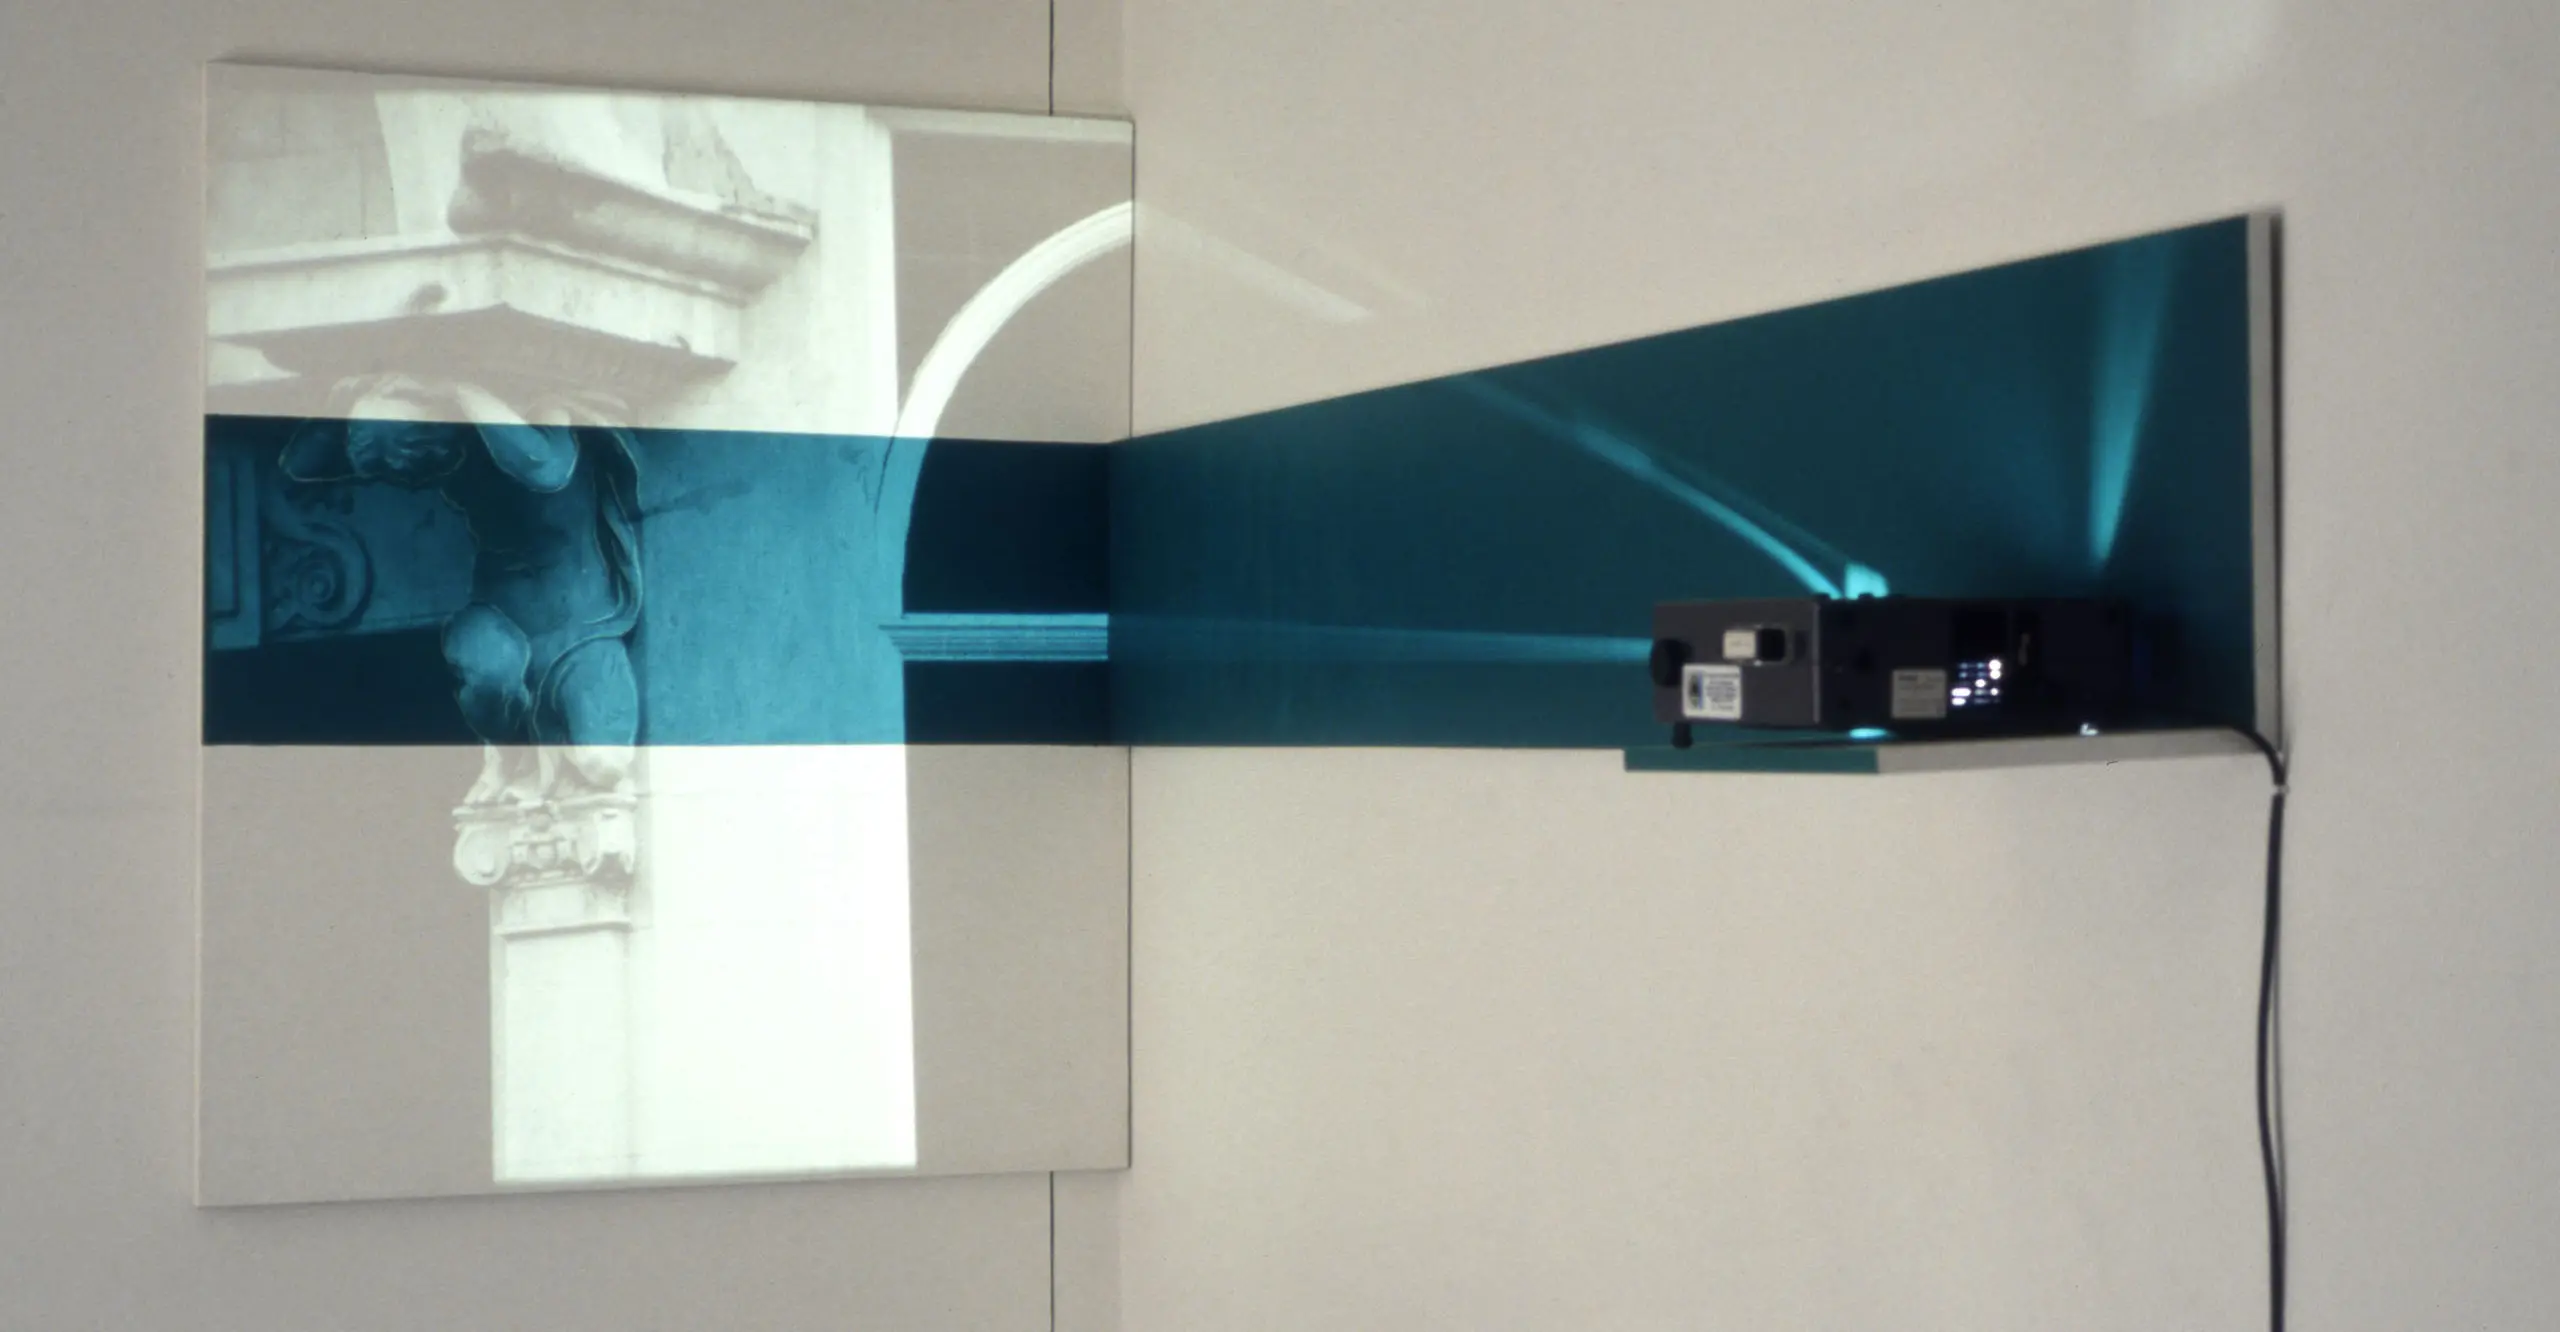 A slide projector sends a blue horizontal strip of light onto a black and white photograph of an architectural detail. 